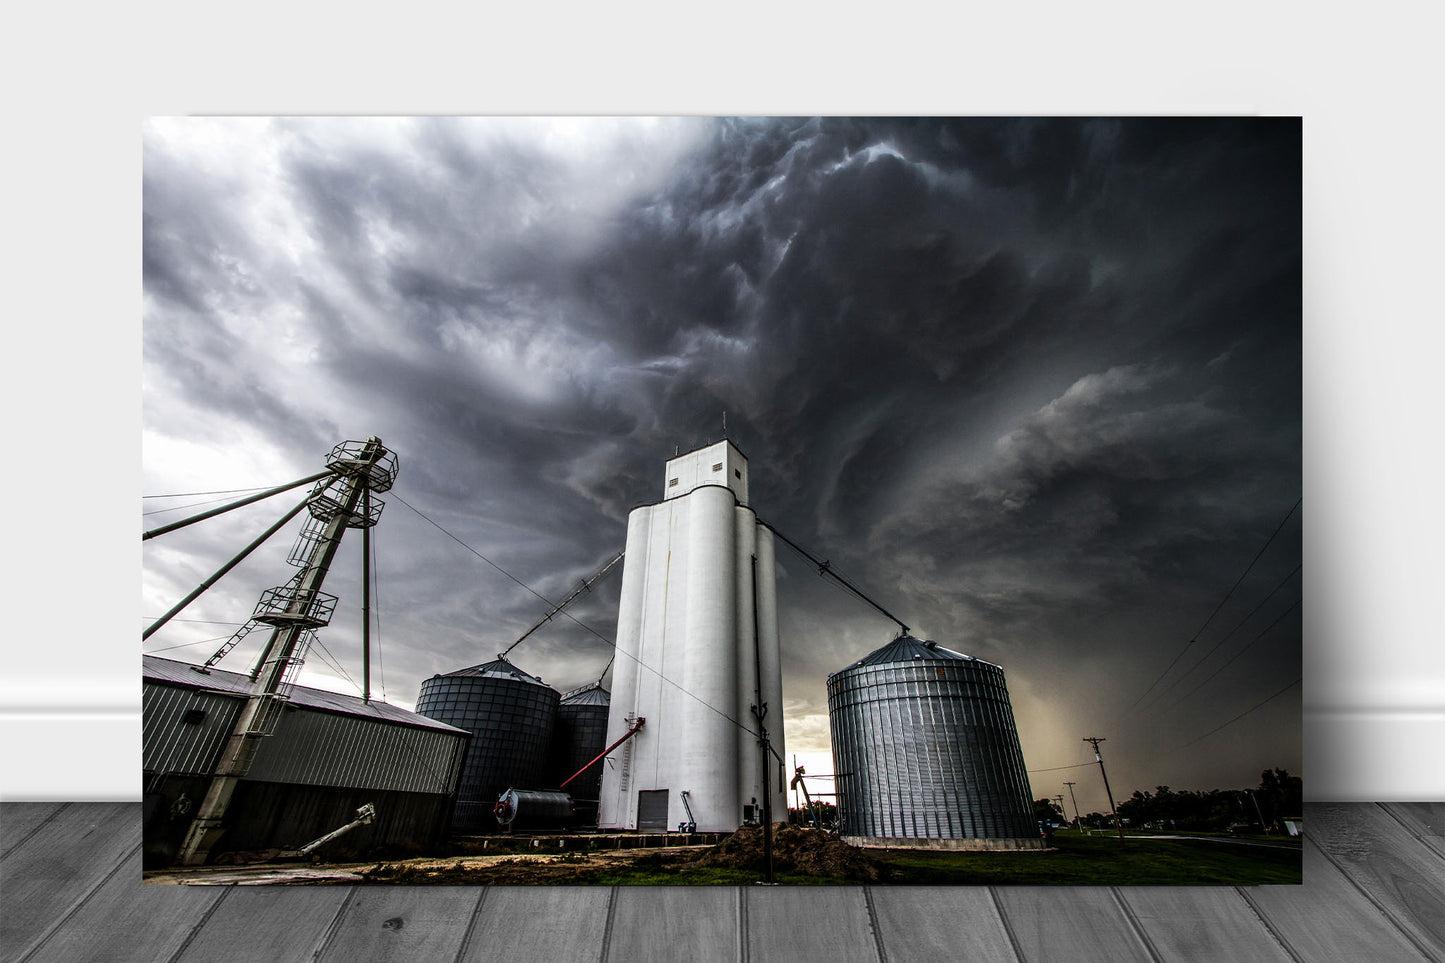 Thunderstorm metal print on aluminum of storm clouds swirling over a grain elevator in a small town in Kansas by Sean Ramsey of Southern Plains Photography.